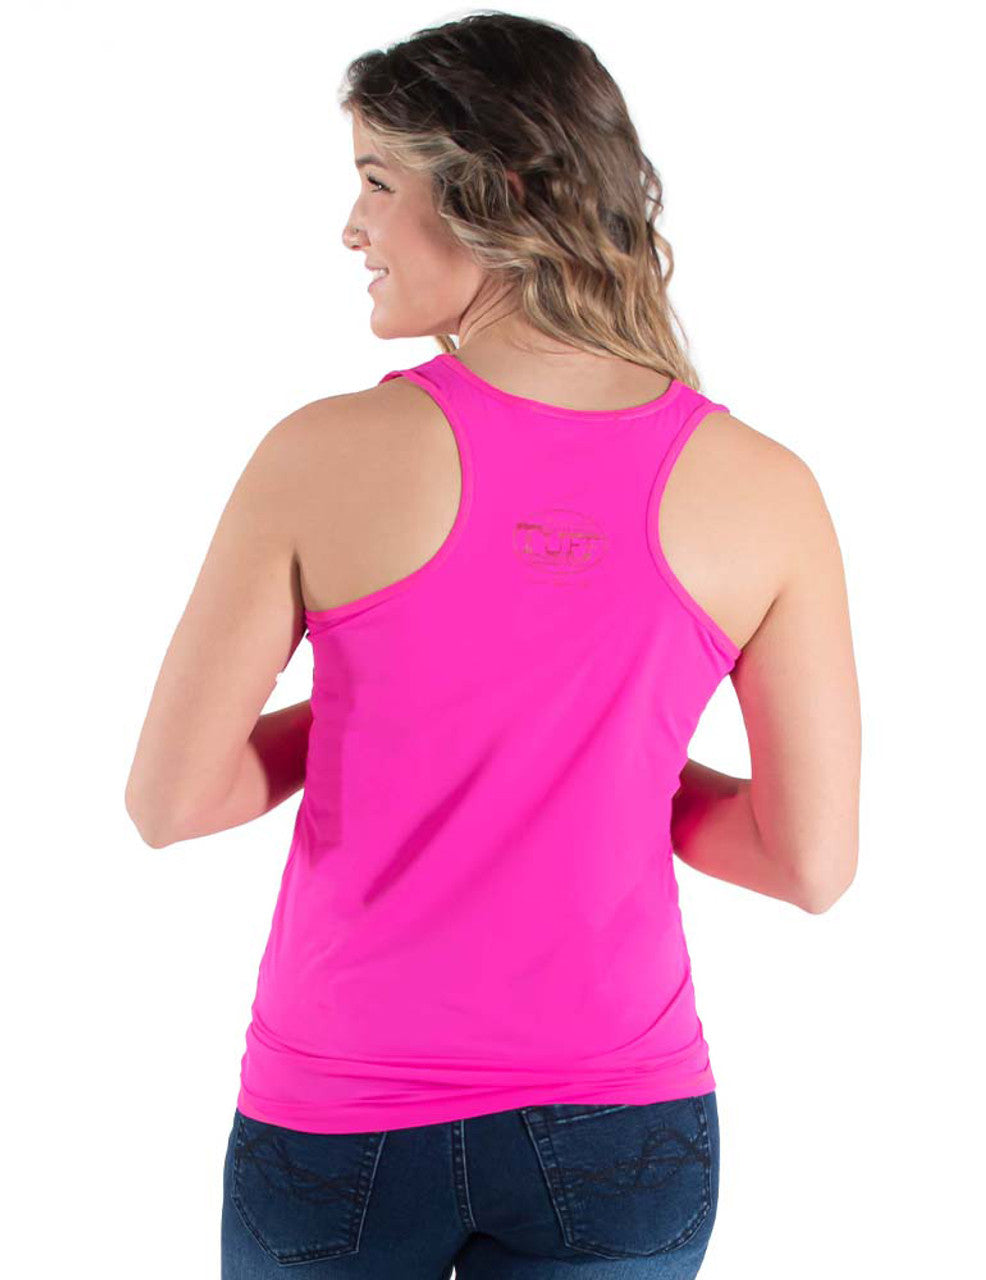 COWGIRL TUFF Women's Hot Pink Breathe Instant Cooling UPF Racerback Tank